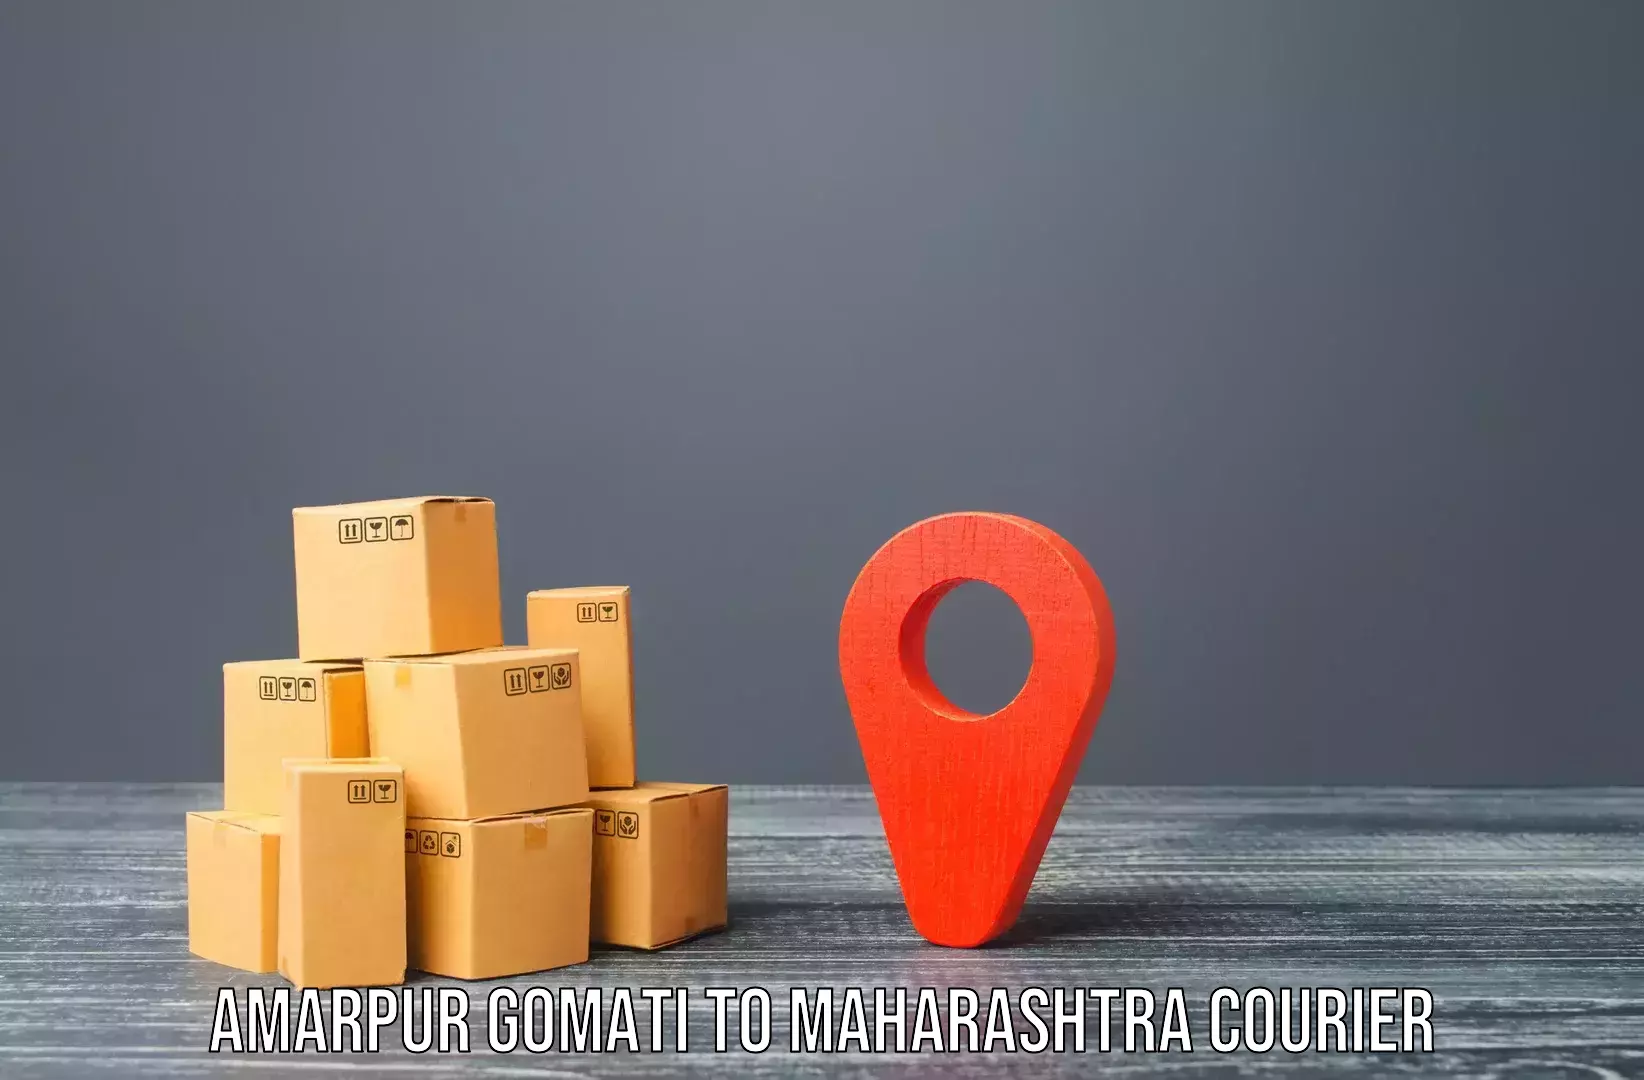 Comprehensive relocation services in Amarpur Gomati to Dhule